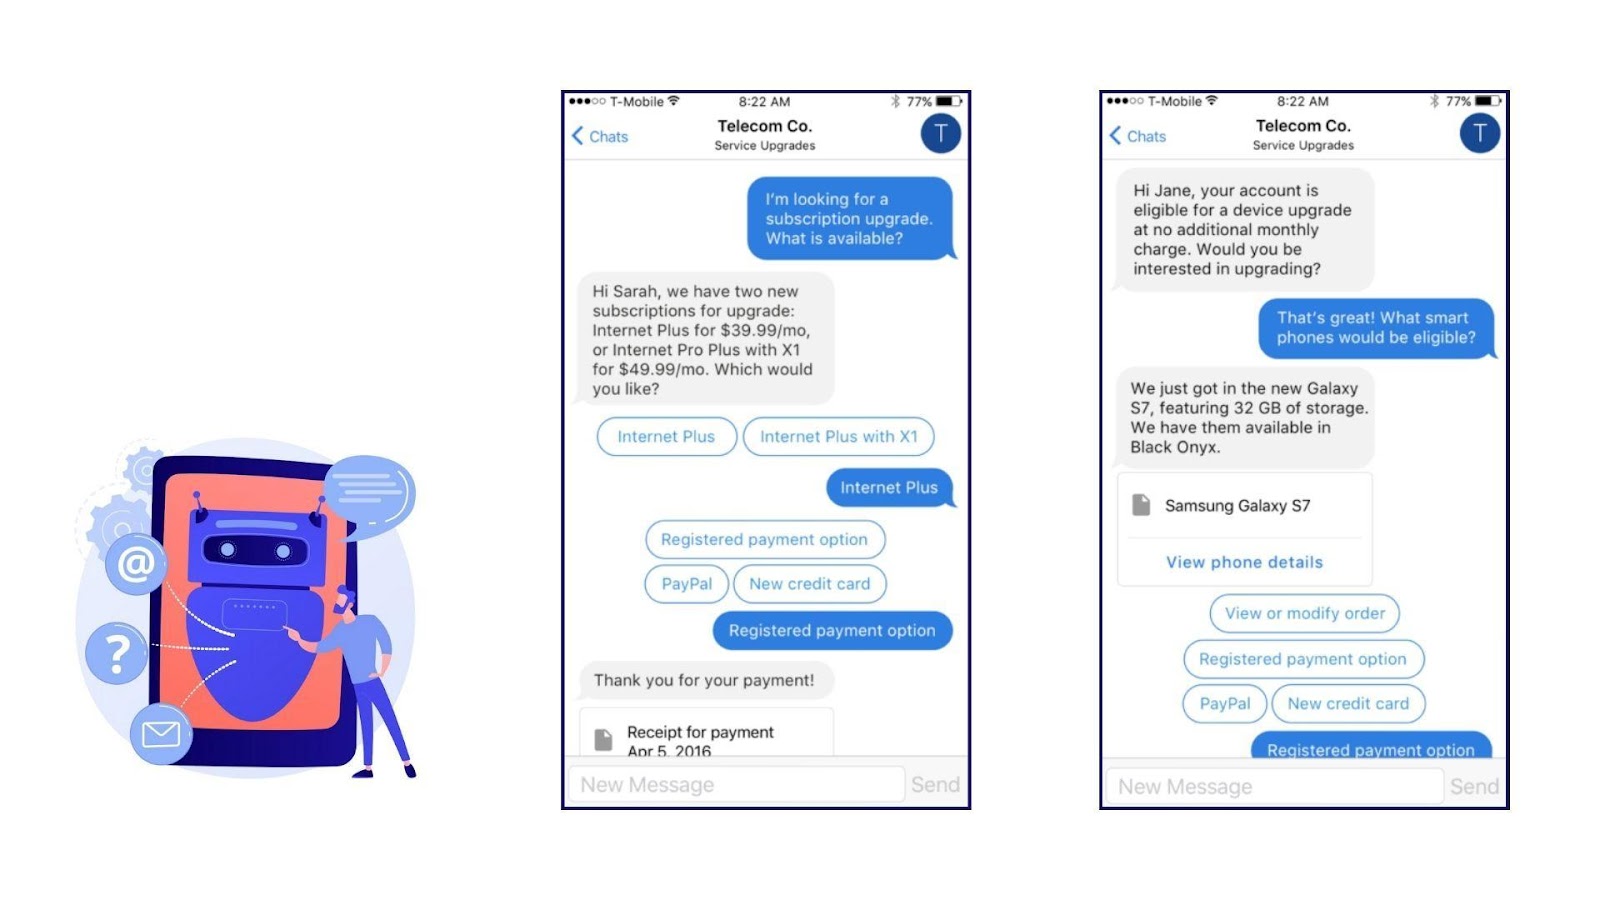 Screenshots of a telecom company’s chatbot that follows up on an order and informs the customer about a special upgrading offer.